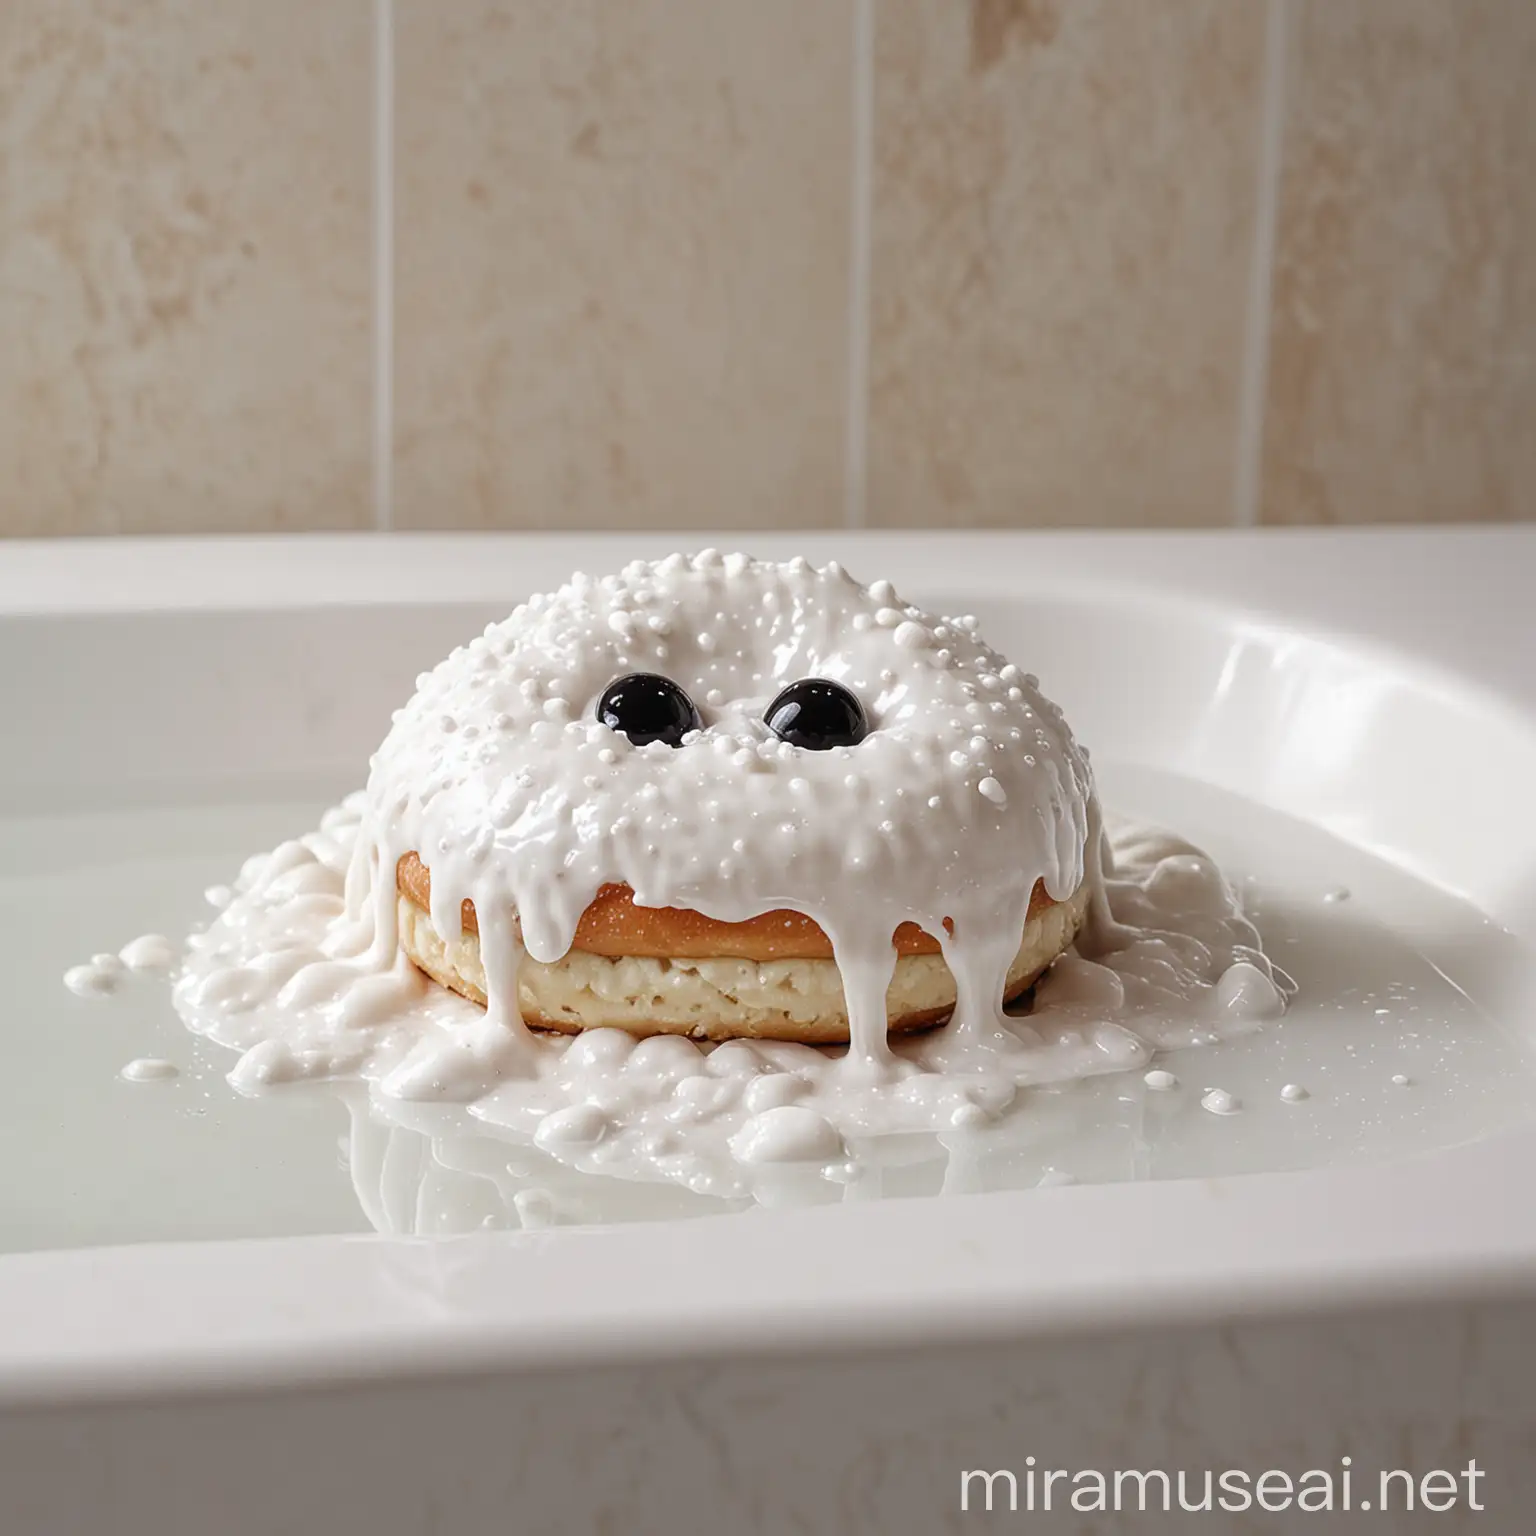 Tempting White Slime Doughnut Sweet Indulgence in Unexpected Places